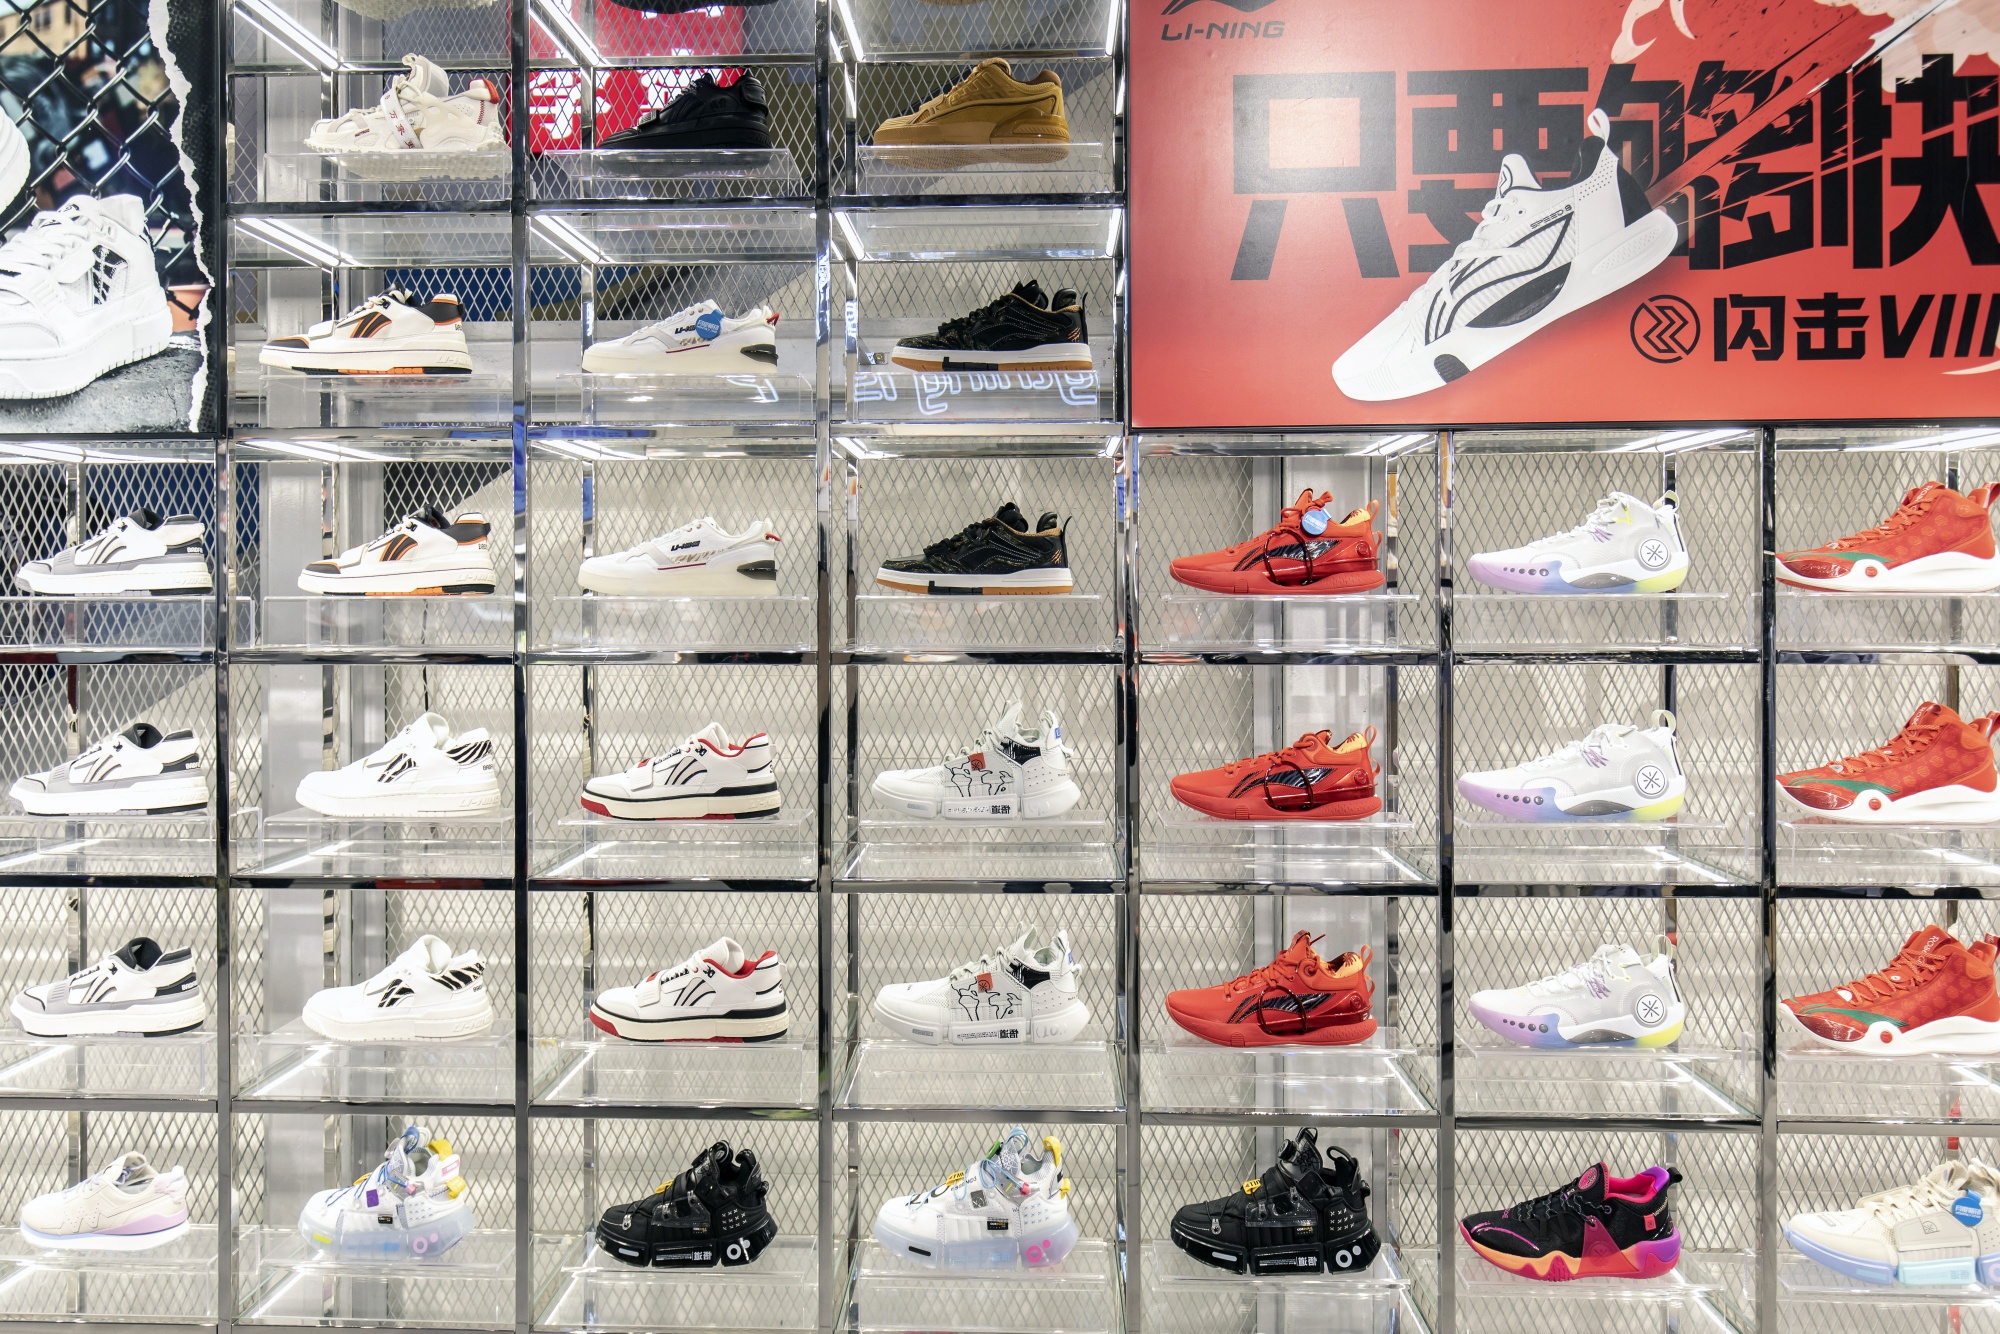 China Most Valuable Brands: Li Ning Taking on Nike Leads Growth - Bloomberg